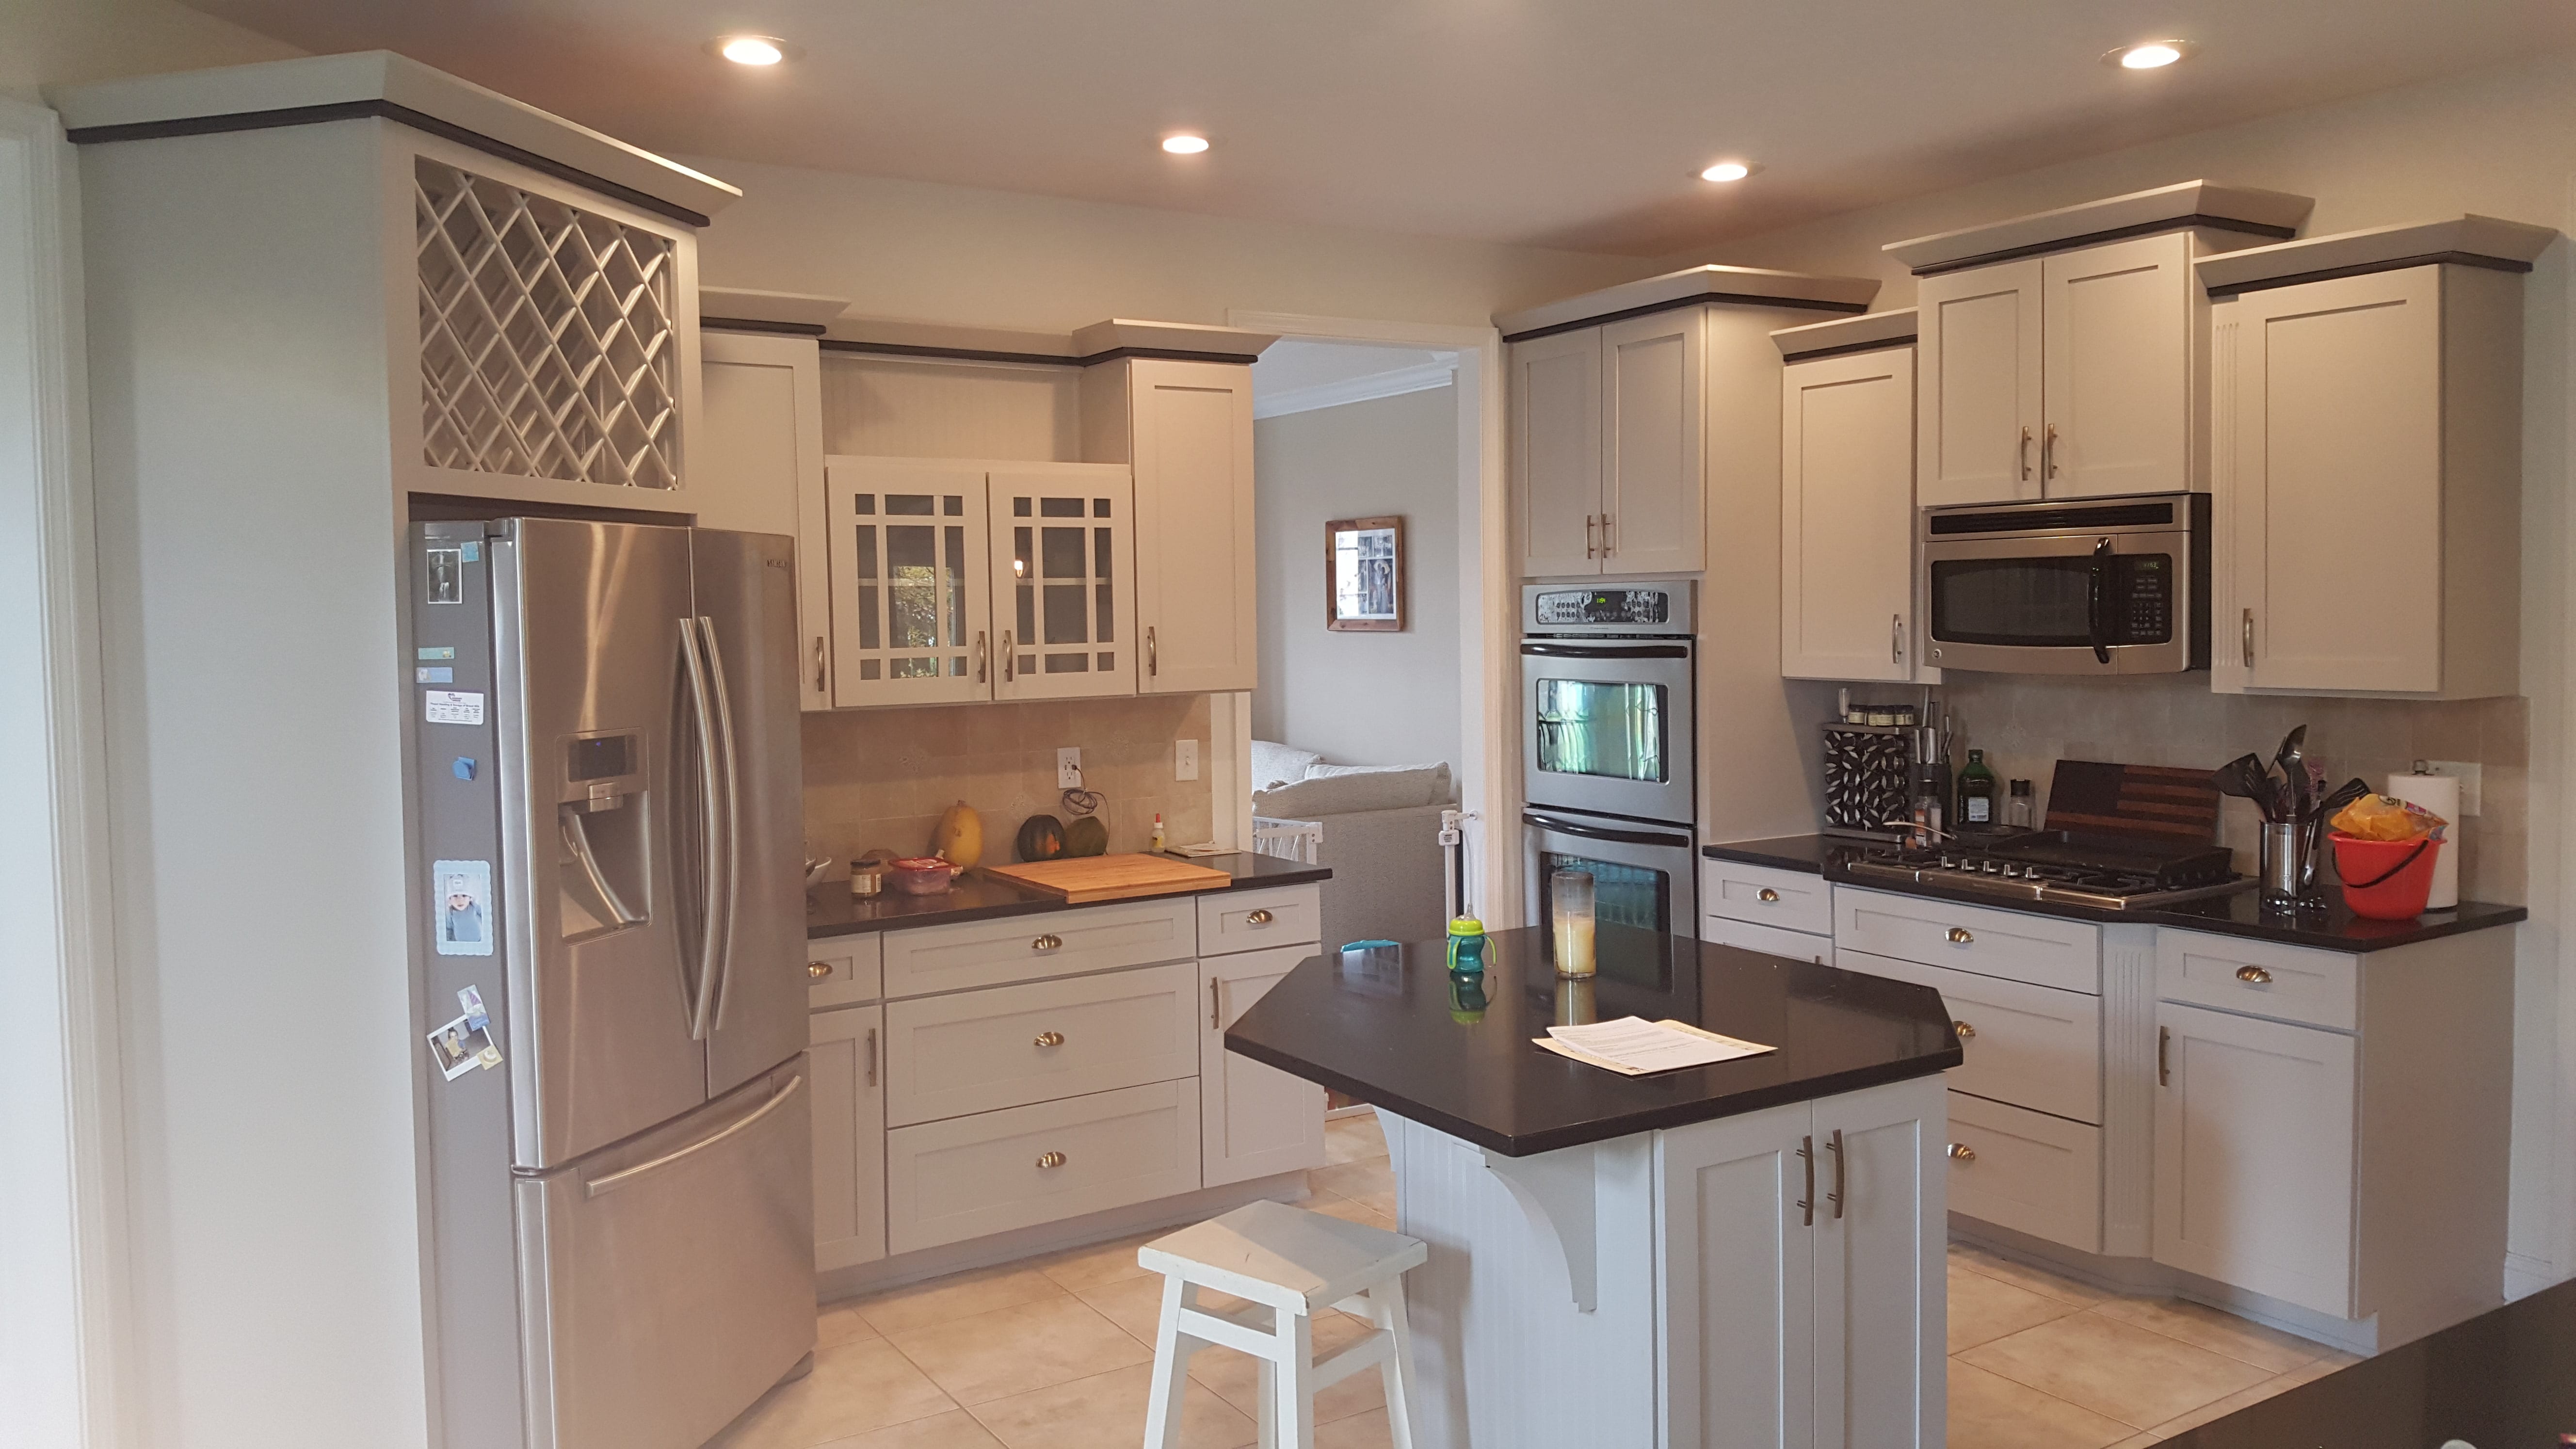 What Color Should I Paint My Kitchen Cabinets? | Textbook ...